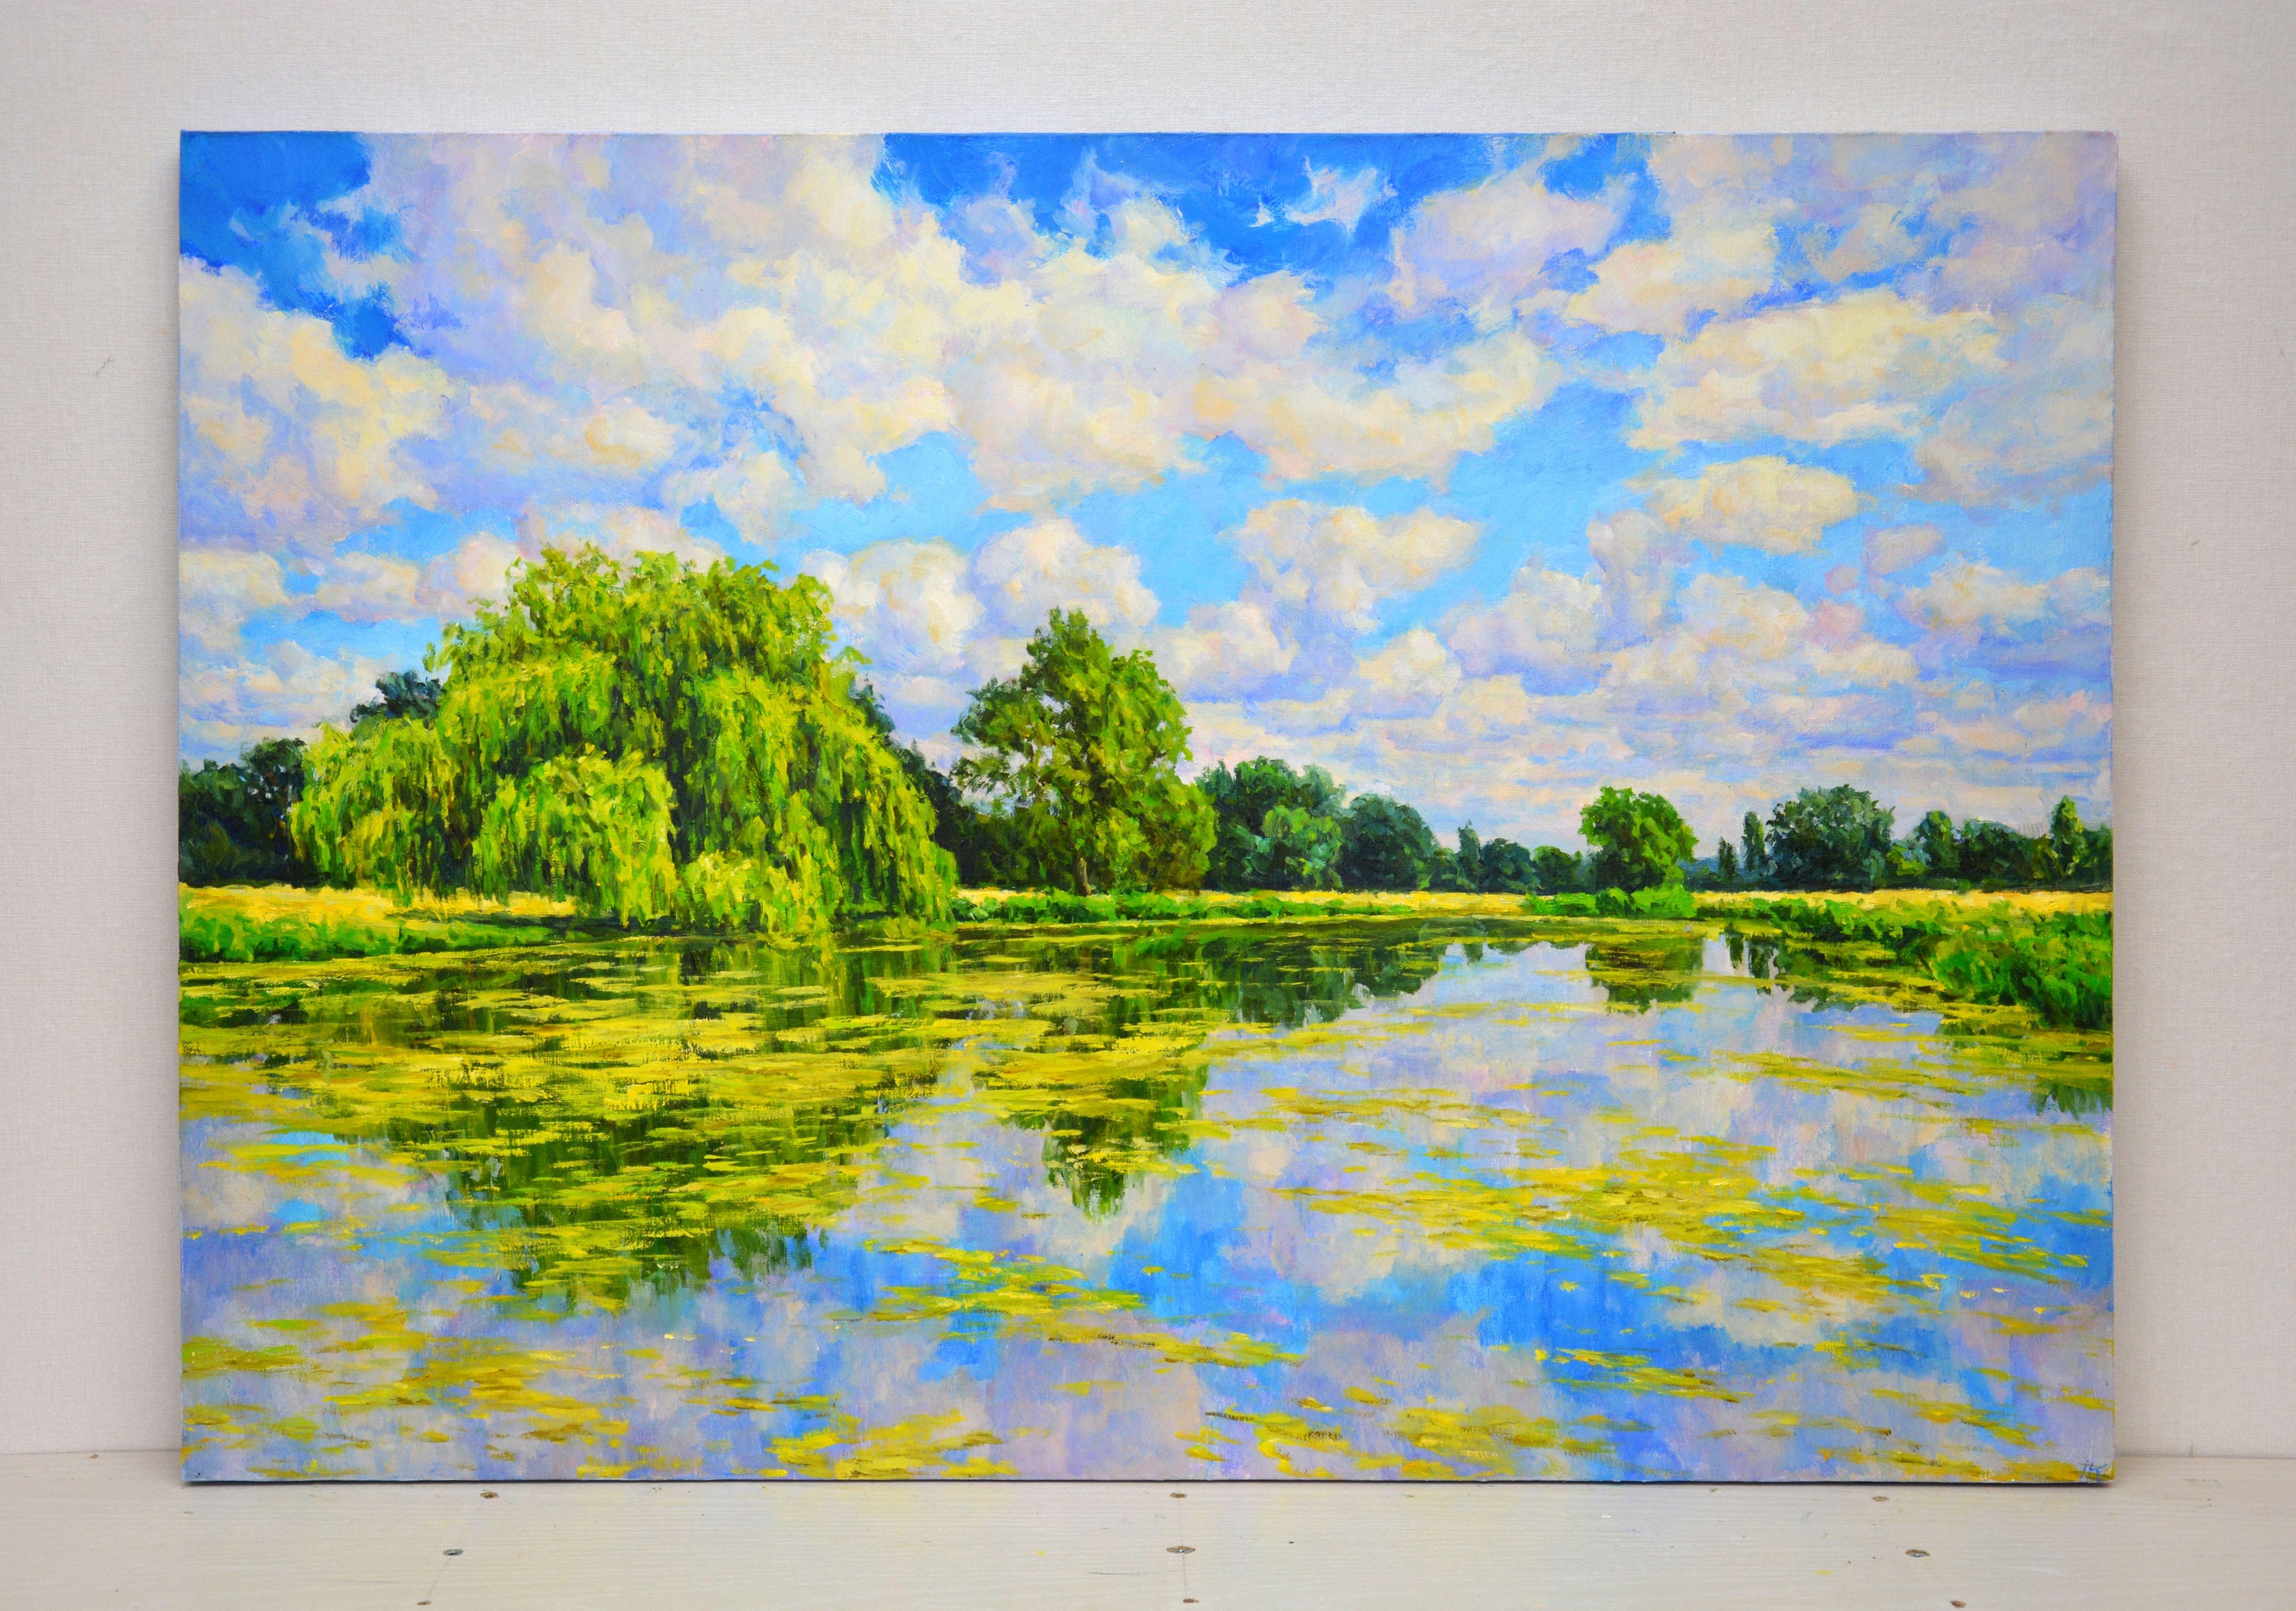 Picture. Summer. The saturated palette of greenery, the reflection of the sky in the water, willows, clouds, a beautiful summer day evoke a feeling of love and gratitude to nature. The picture has good spatial quality, and the colors cause joy in